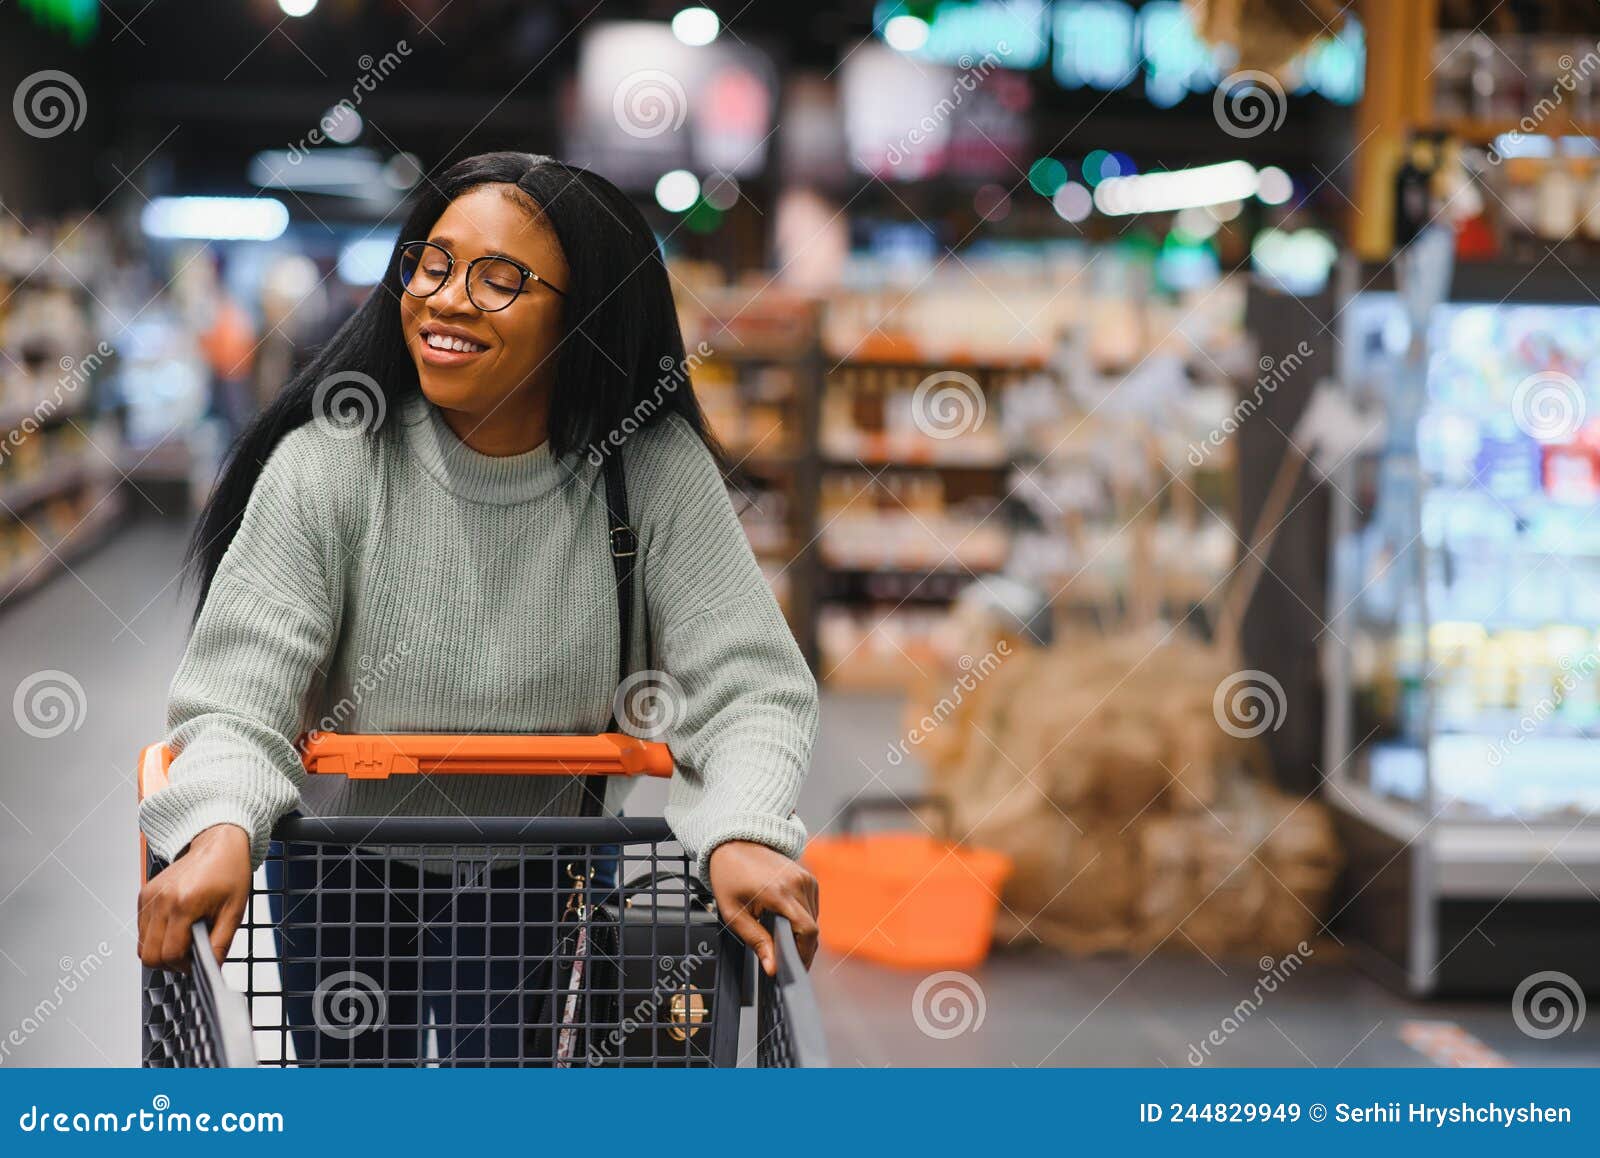 African American Woman at Supermarket with Shopping Cart Stock Image ...